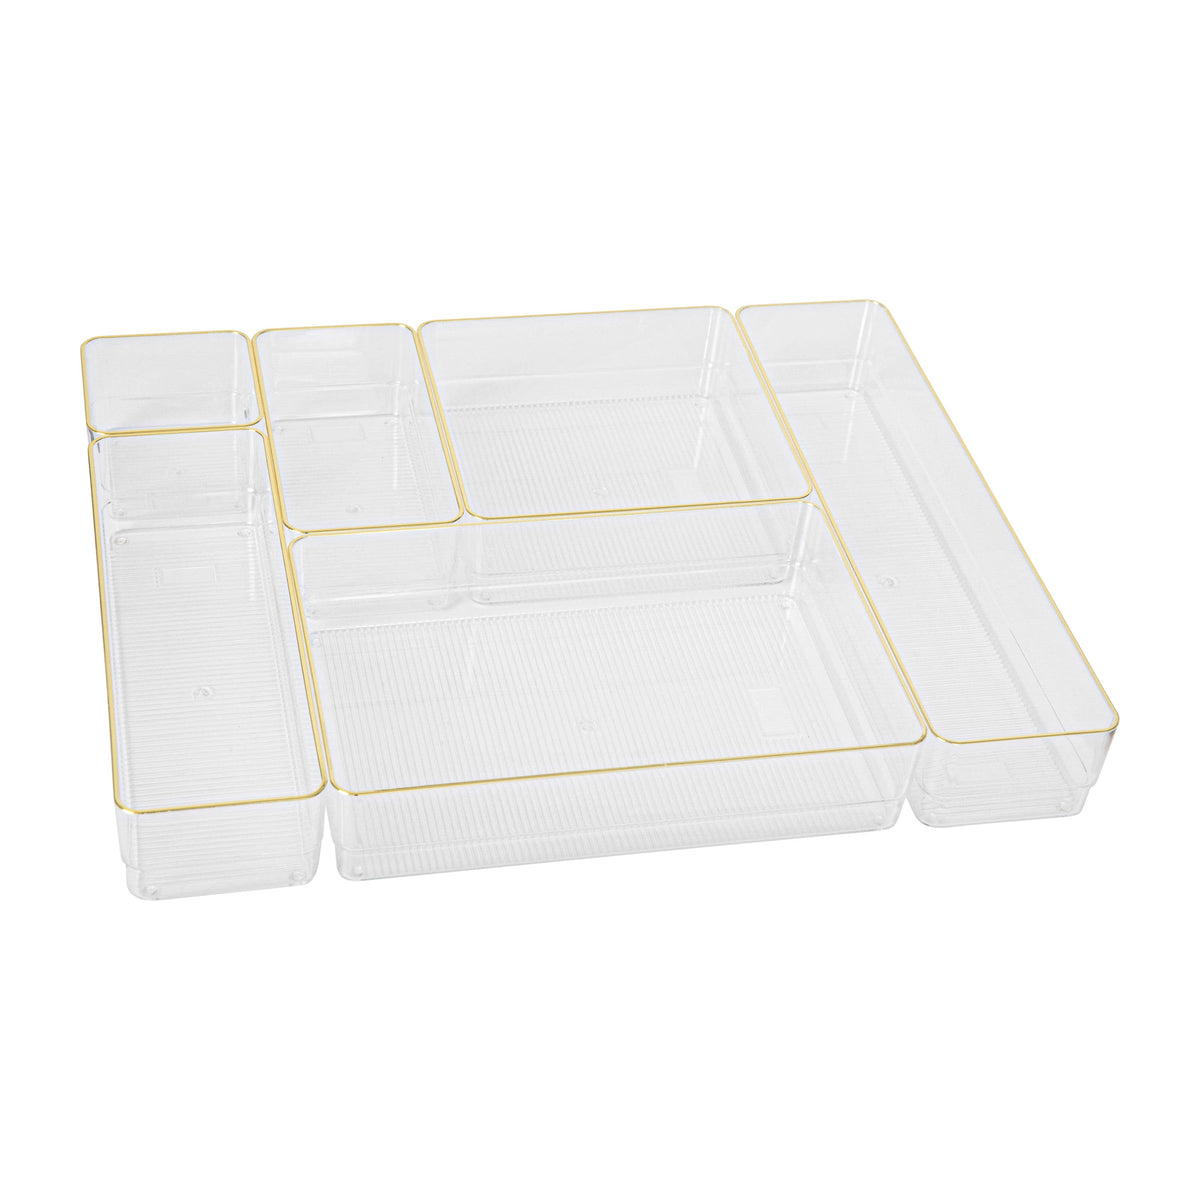 Set of 6 Plastic Stacking Office Desk Drawer Organizers with Gold Trim